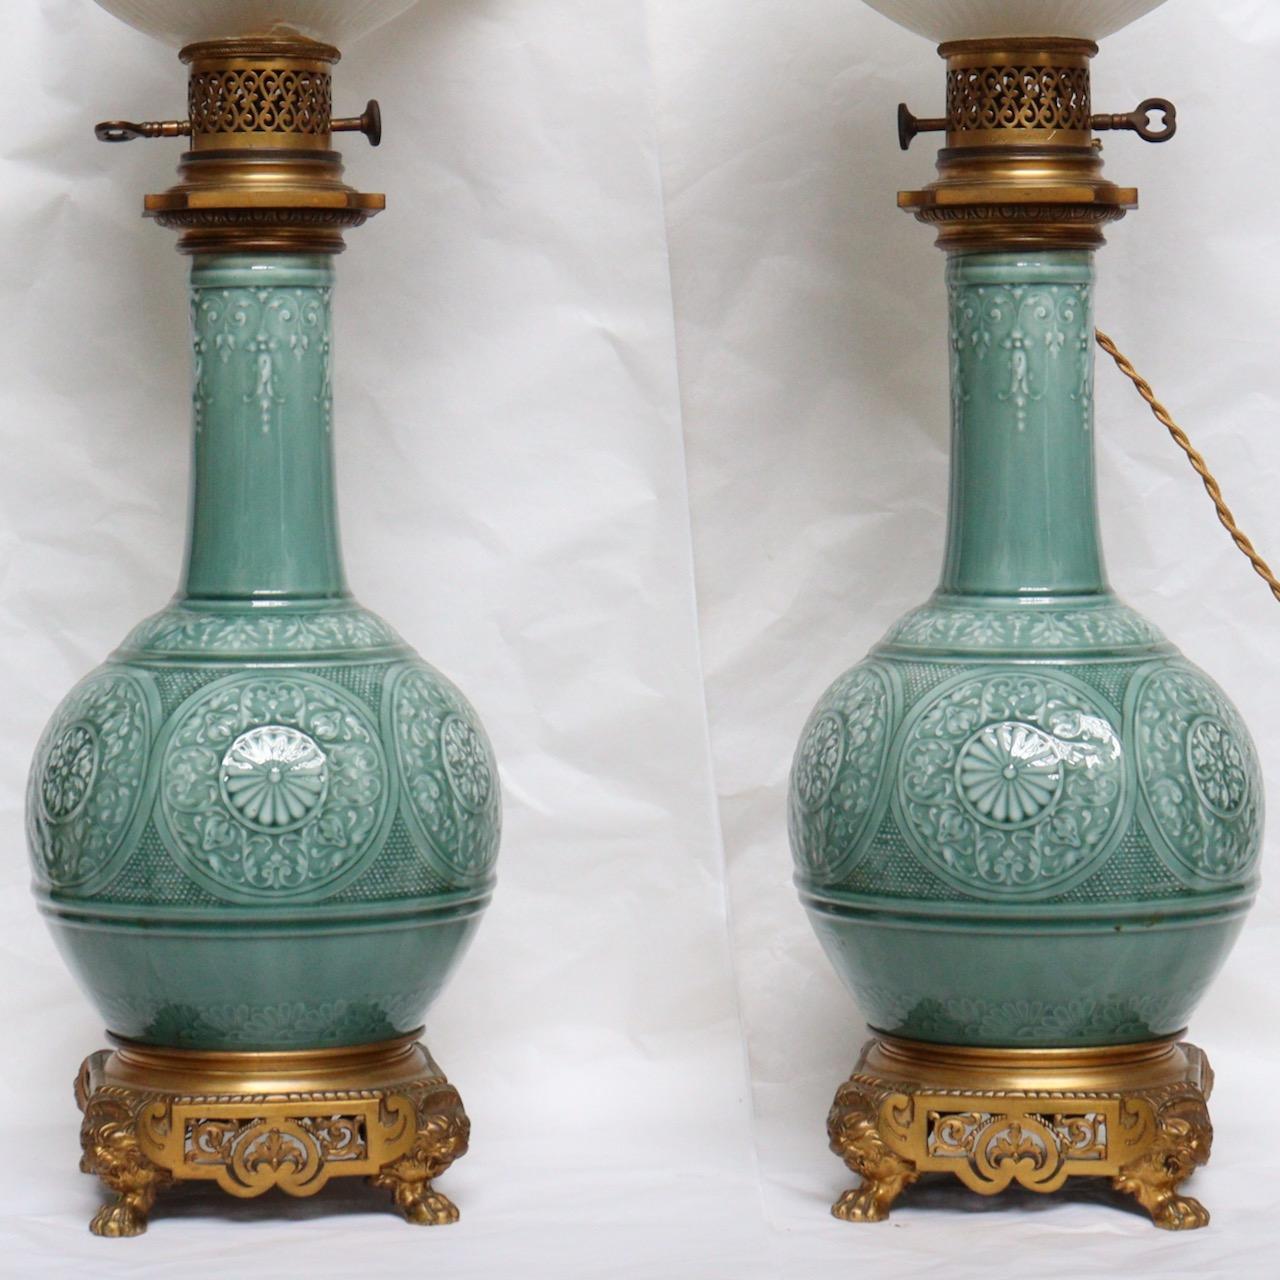 Theodore Deck ( 1823-1891).
A pair of gilt-bronze mounted theodore deck faience celadon-ground vases, mounted as lamps.
Each decorated in the Chinese taste, with flower-head medallions within foliate scrollwork.
Very fine Ormolu mounts quality and